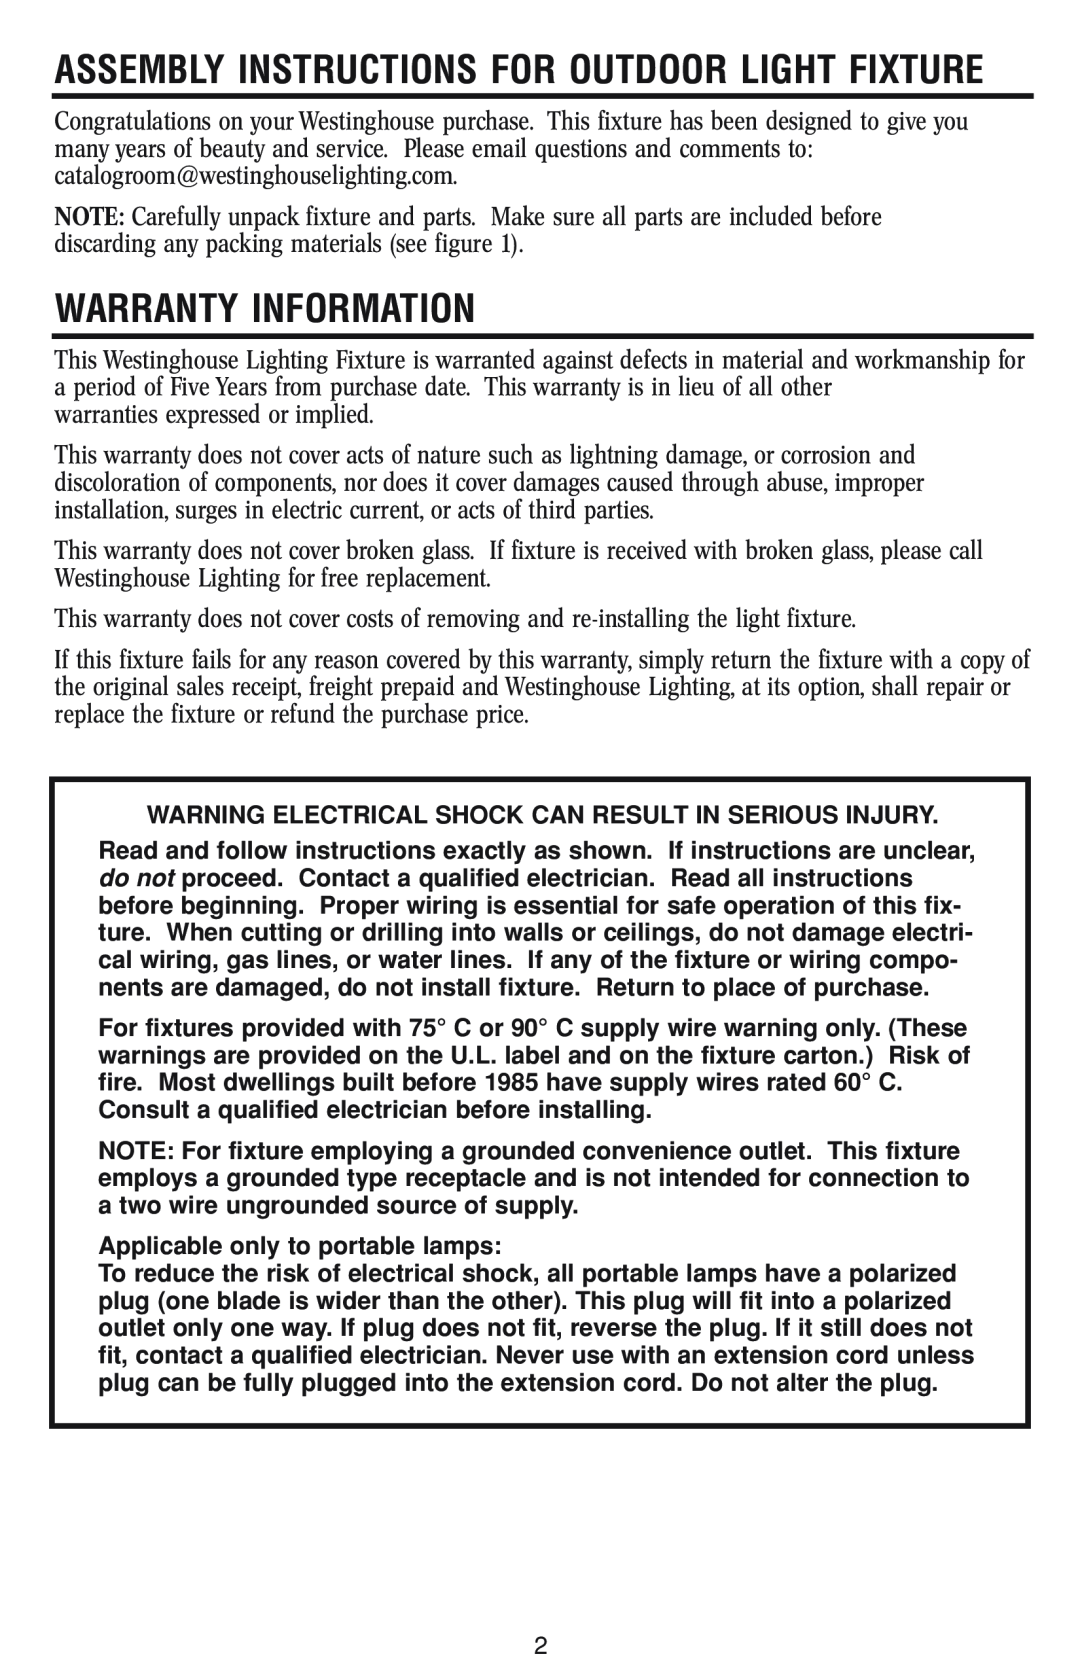 Westinghouse W-042 owner manual Warranty Information, Assembly Instructions For Outdoor Light Fixture 